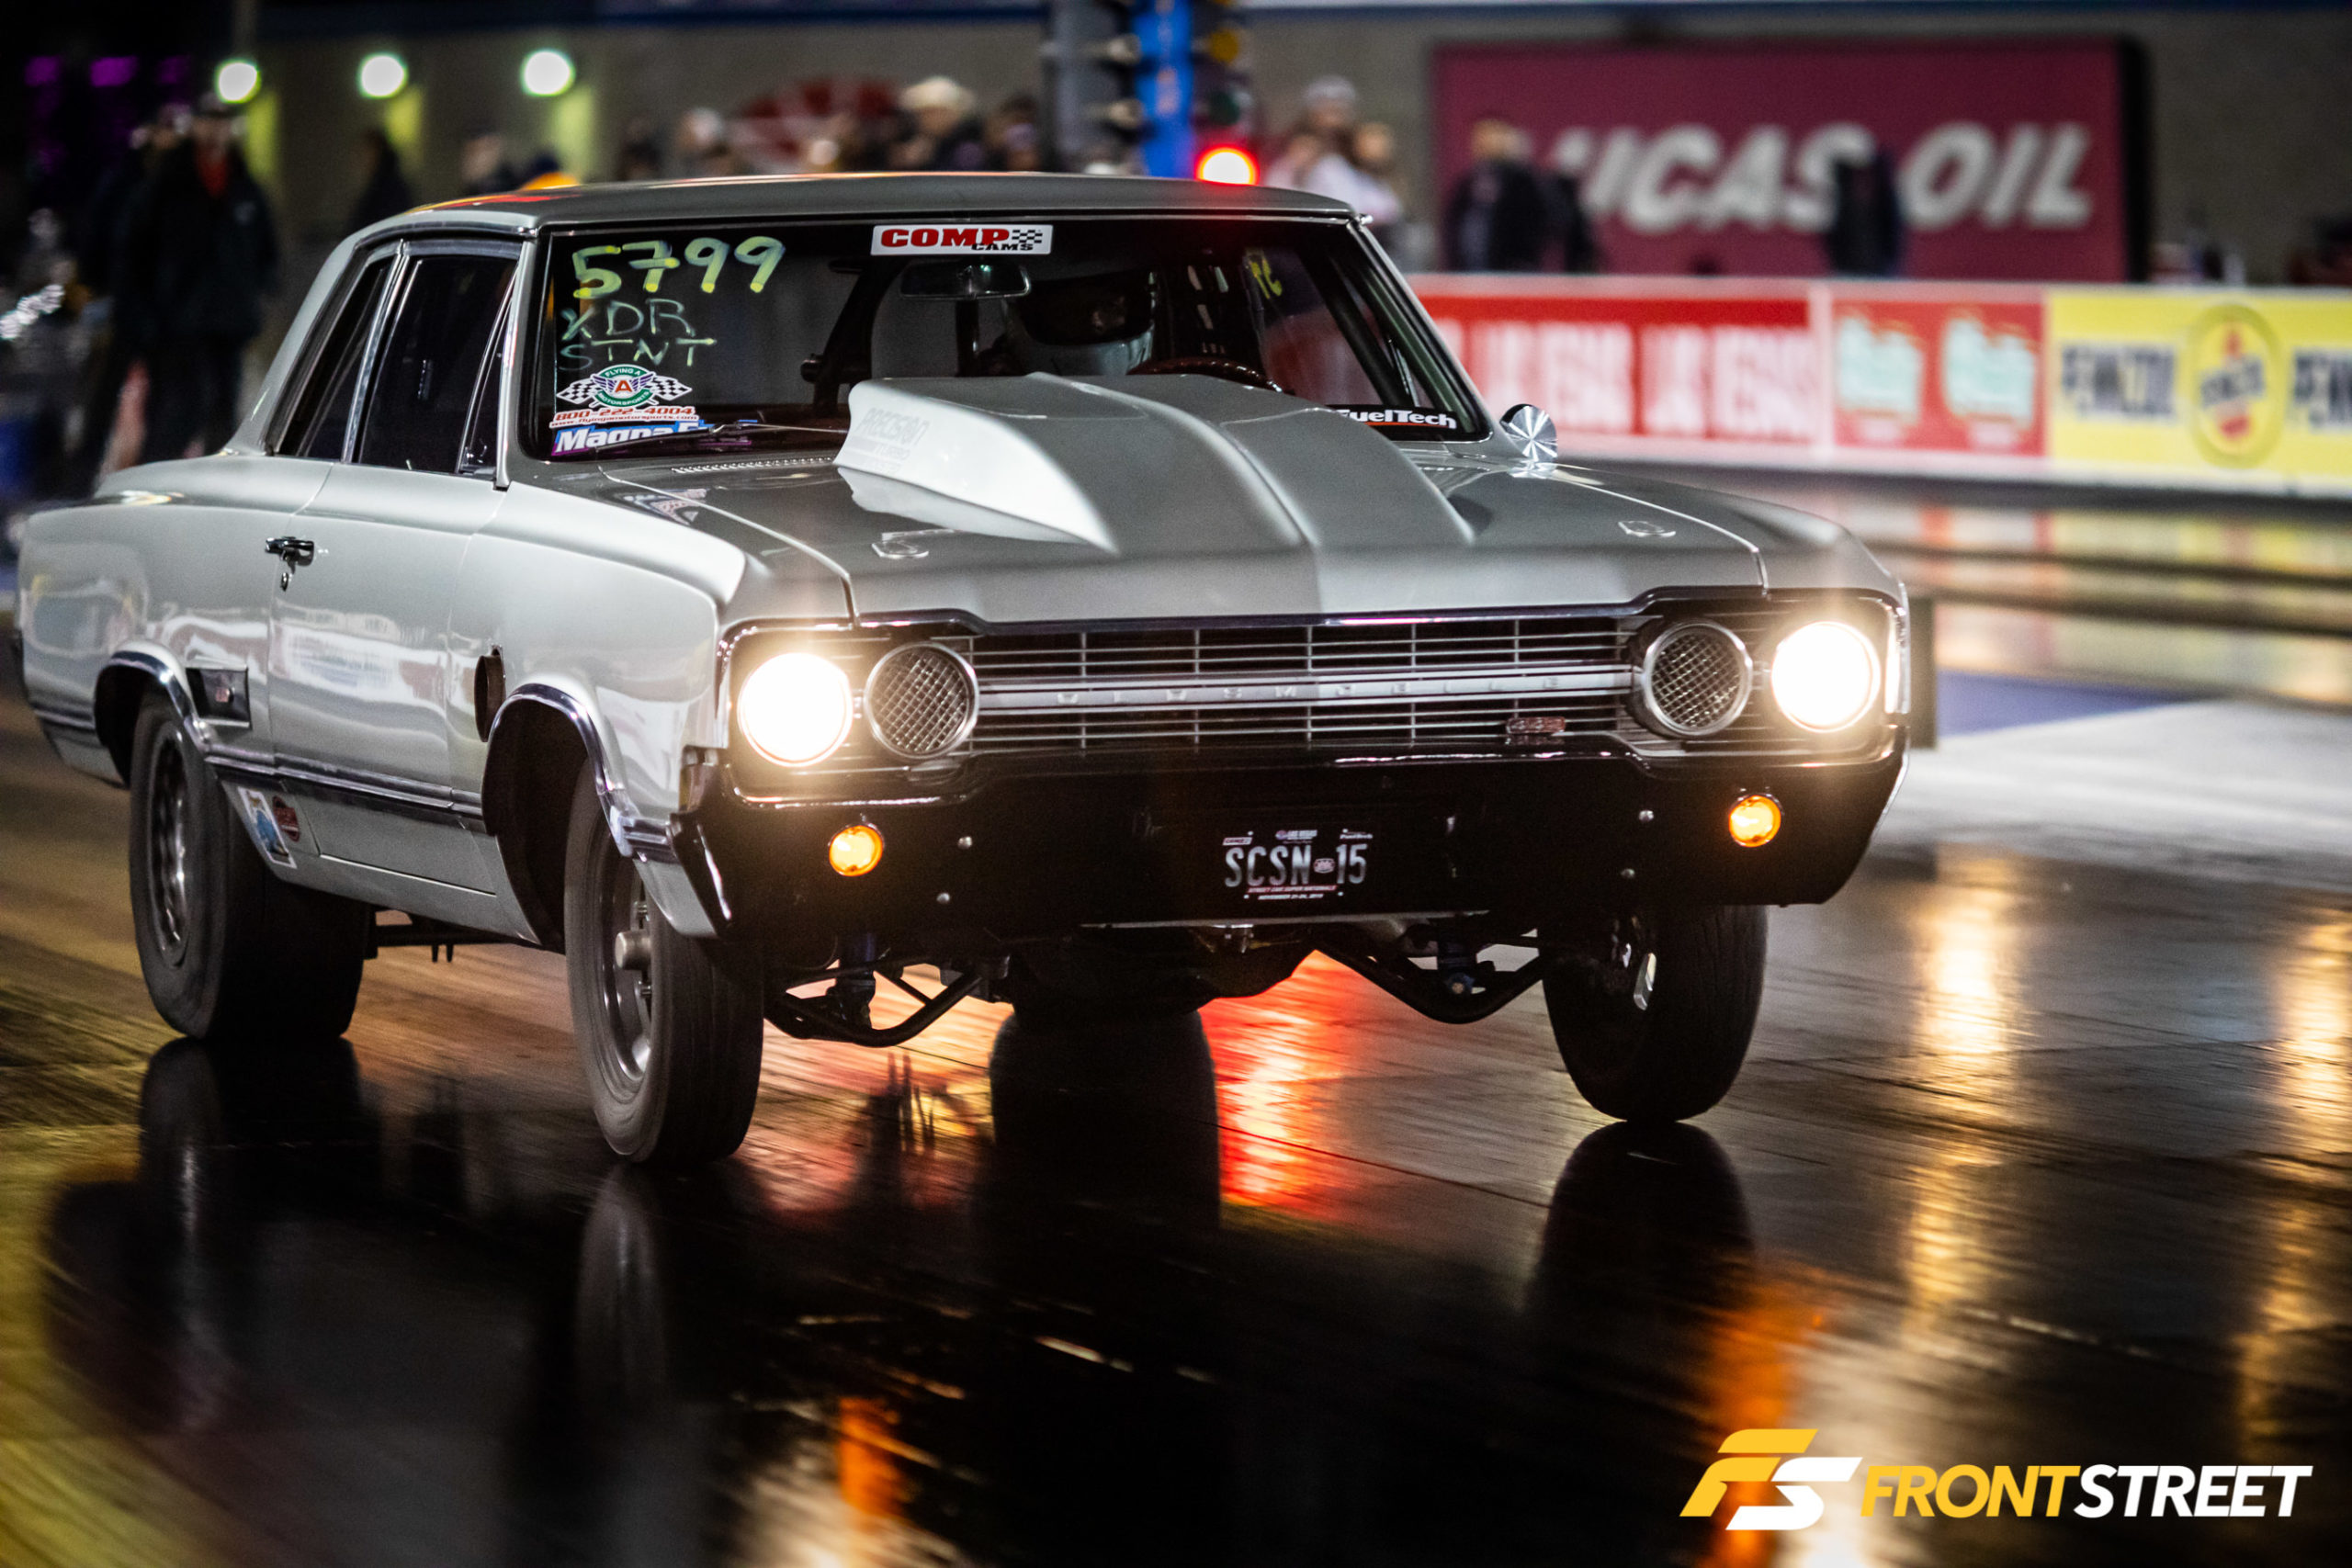 The Big Booty A-Body: Darce Laws’ Turbocharged XDR Oldsmobile 442